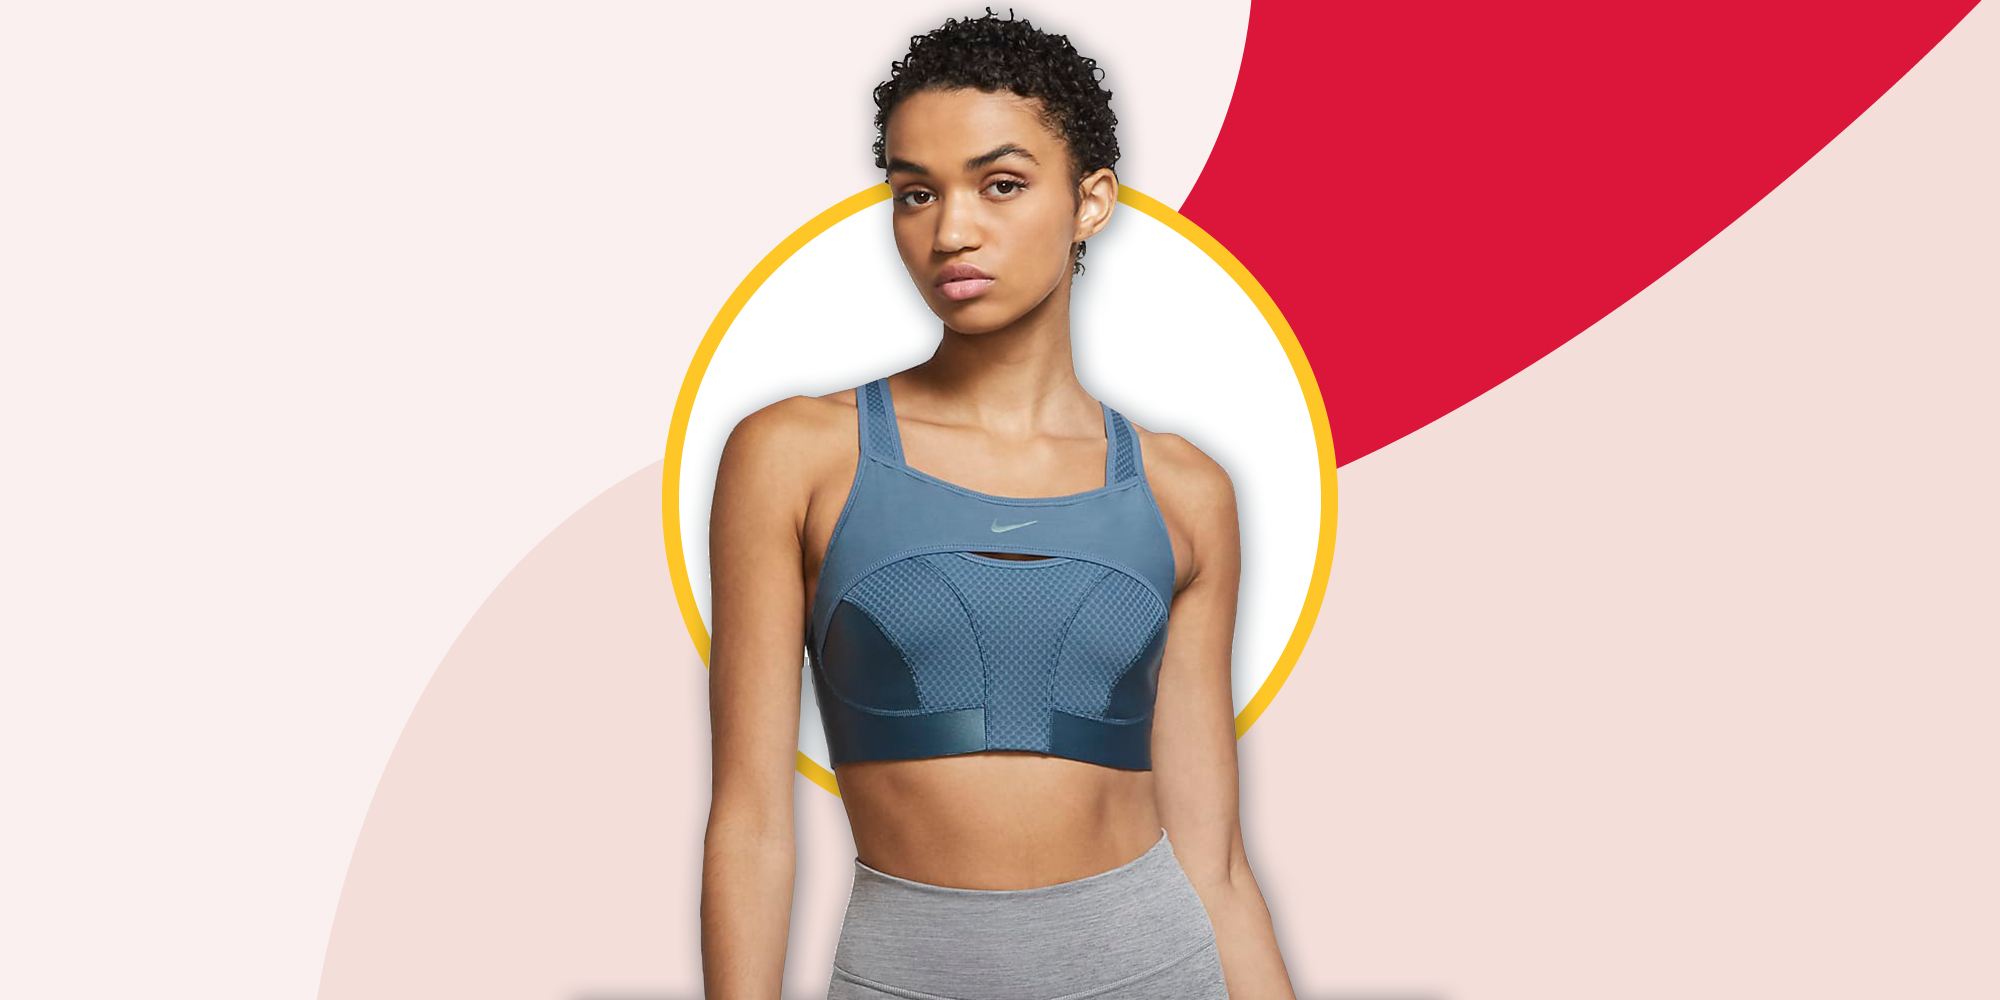 Essential Padded Sport Bras with Built-in Bras Classic Soft Crop Top for Yoga Workout Running